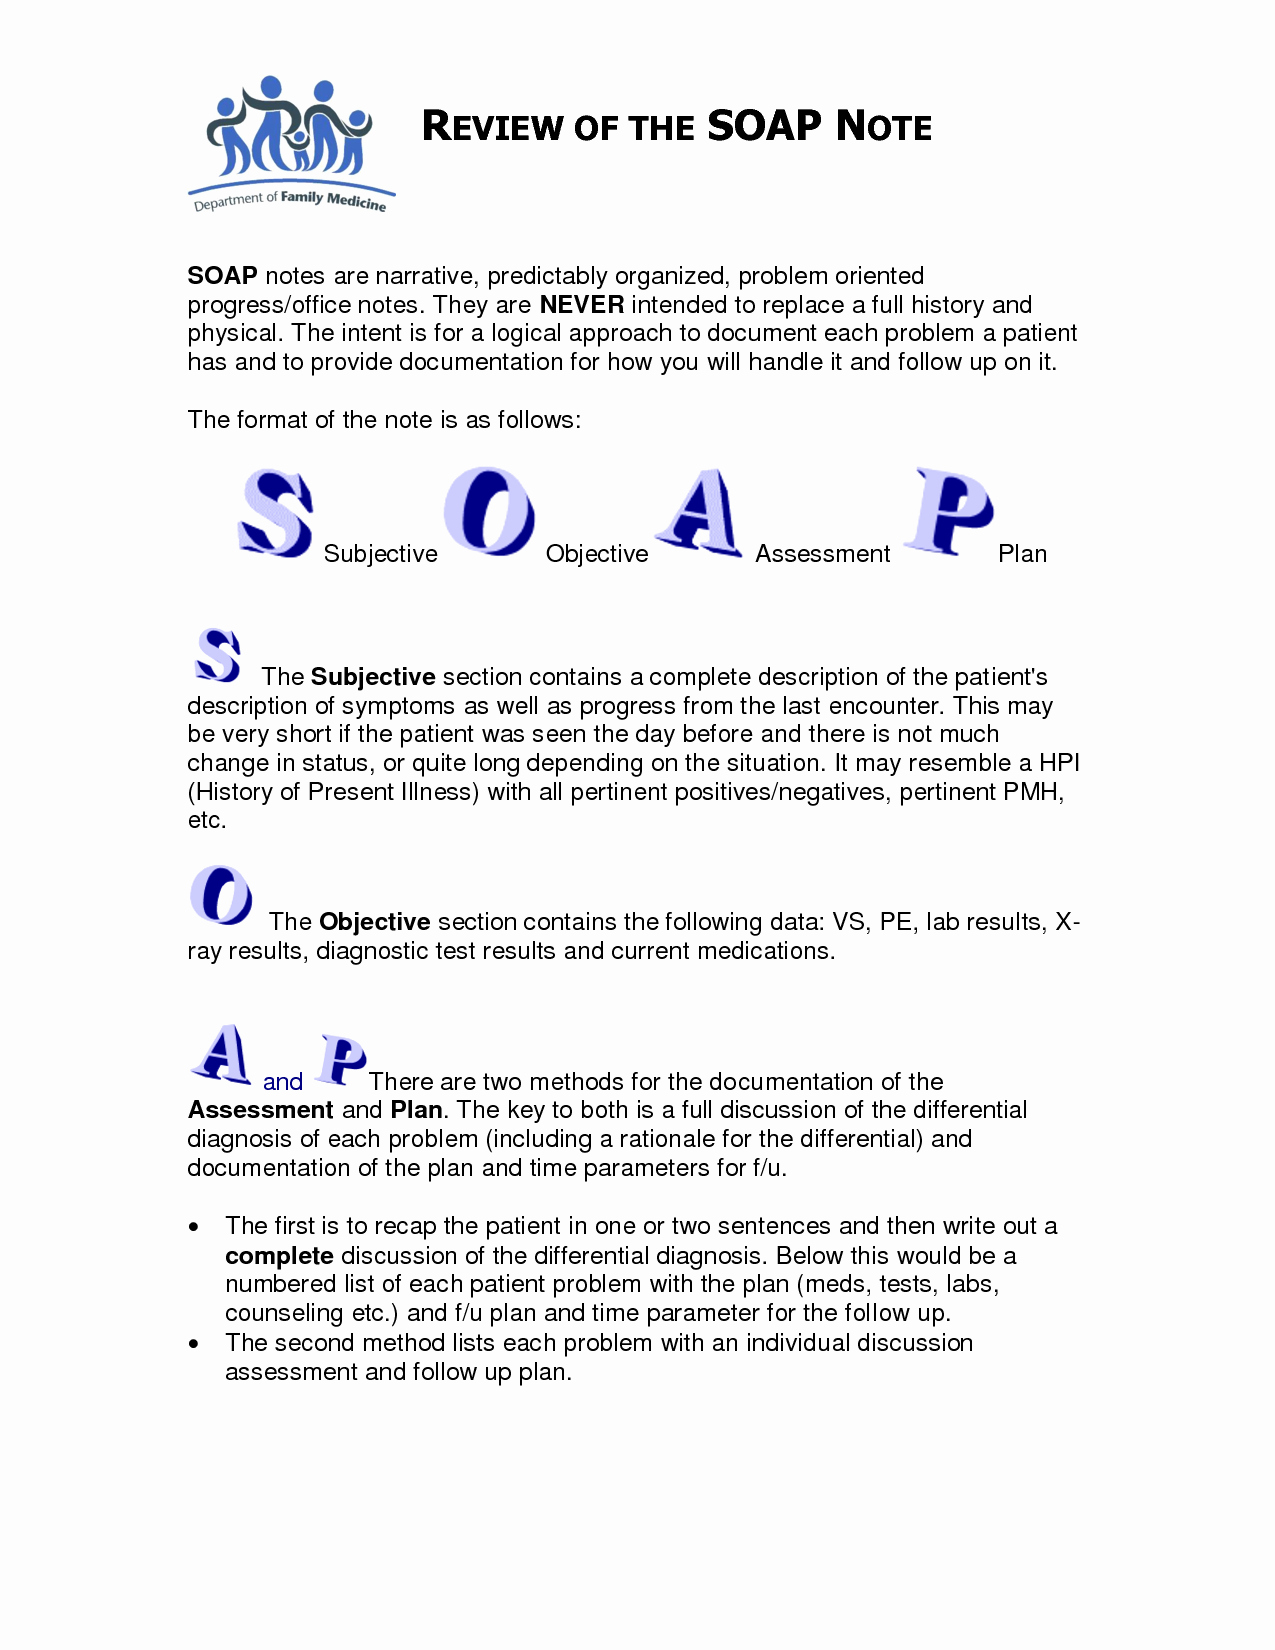 Soap therapy Note Template Best Of soap Note Template Counseling Google Search